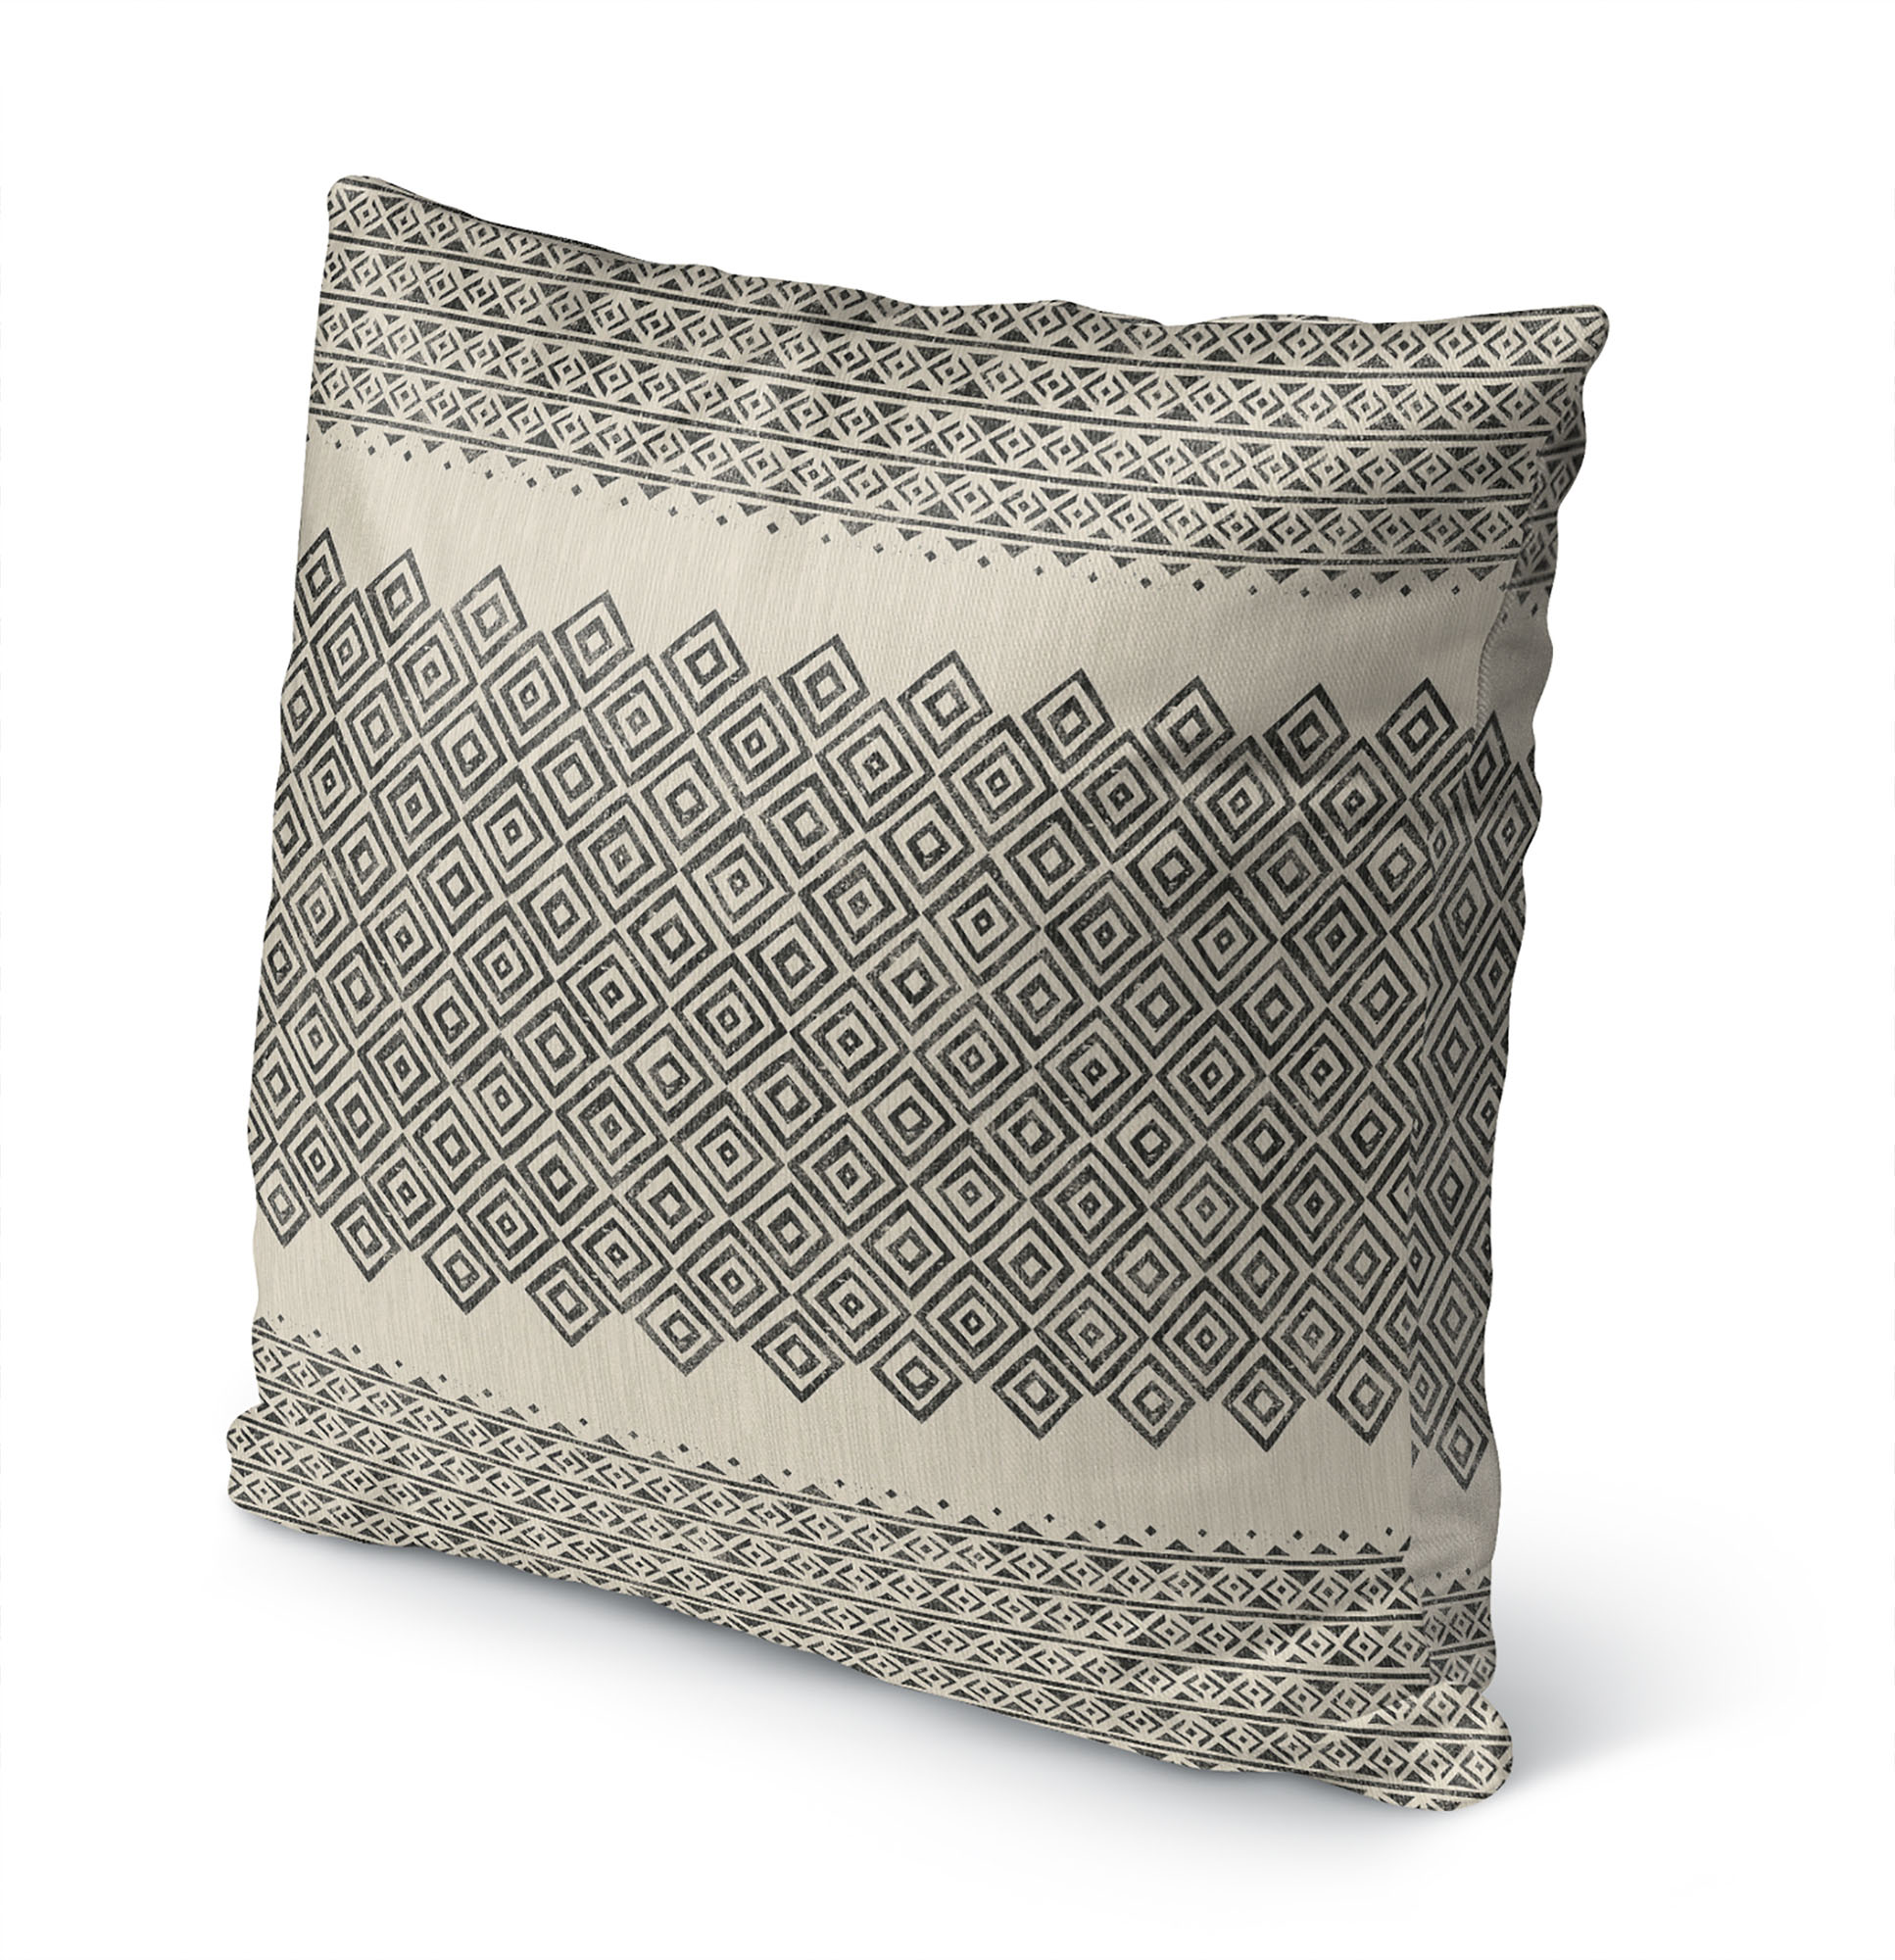 Uma Beige Outdoor Pillow by Kavka Designs - image 3 of 5